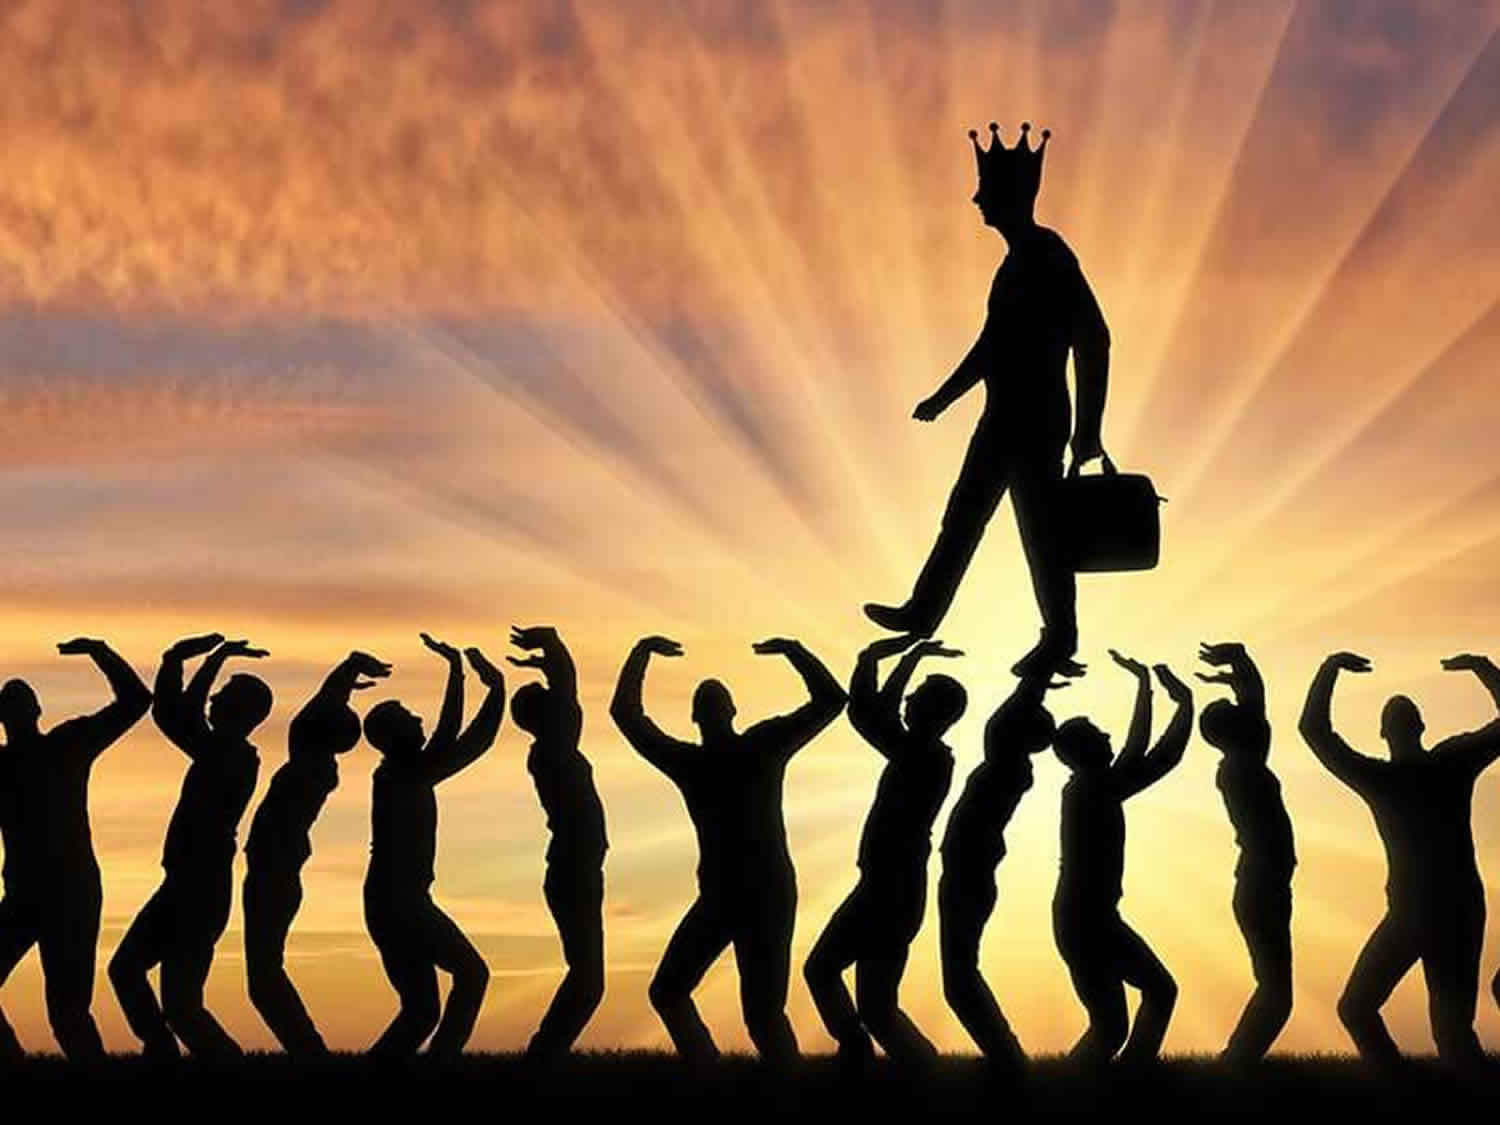 A silhouette artwork and illustration of a walking man with crown